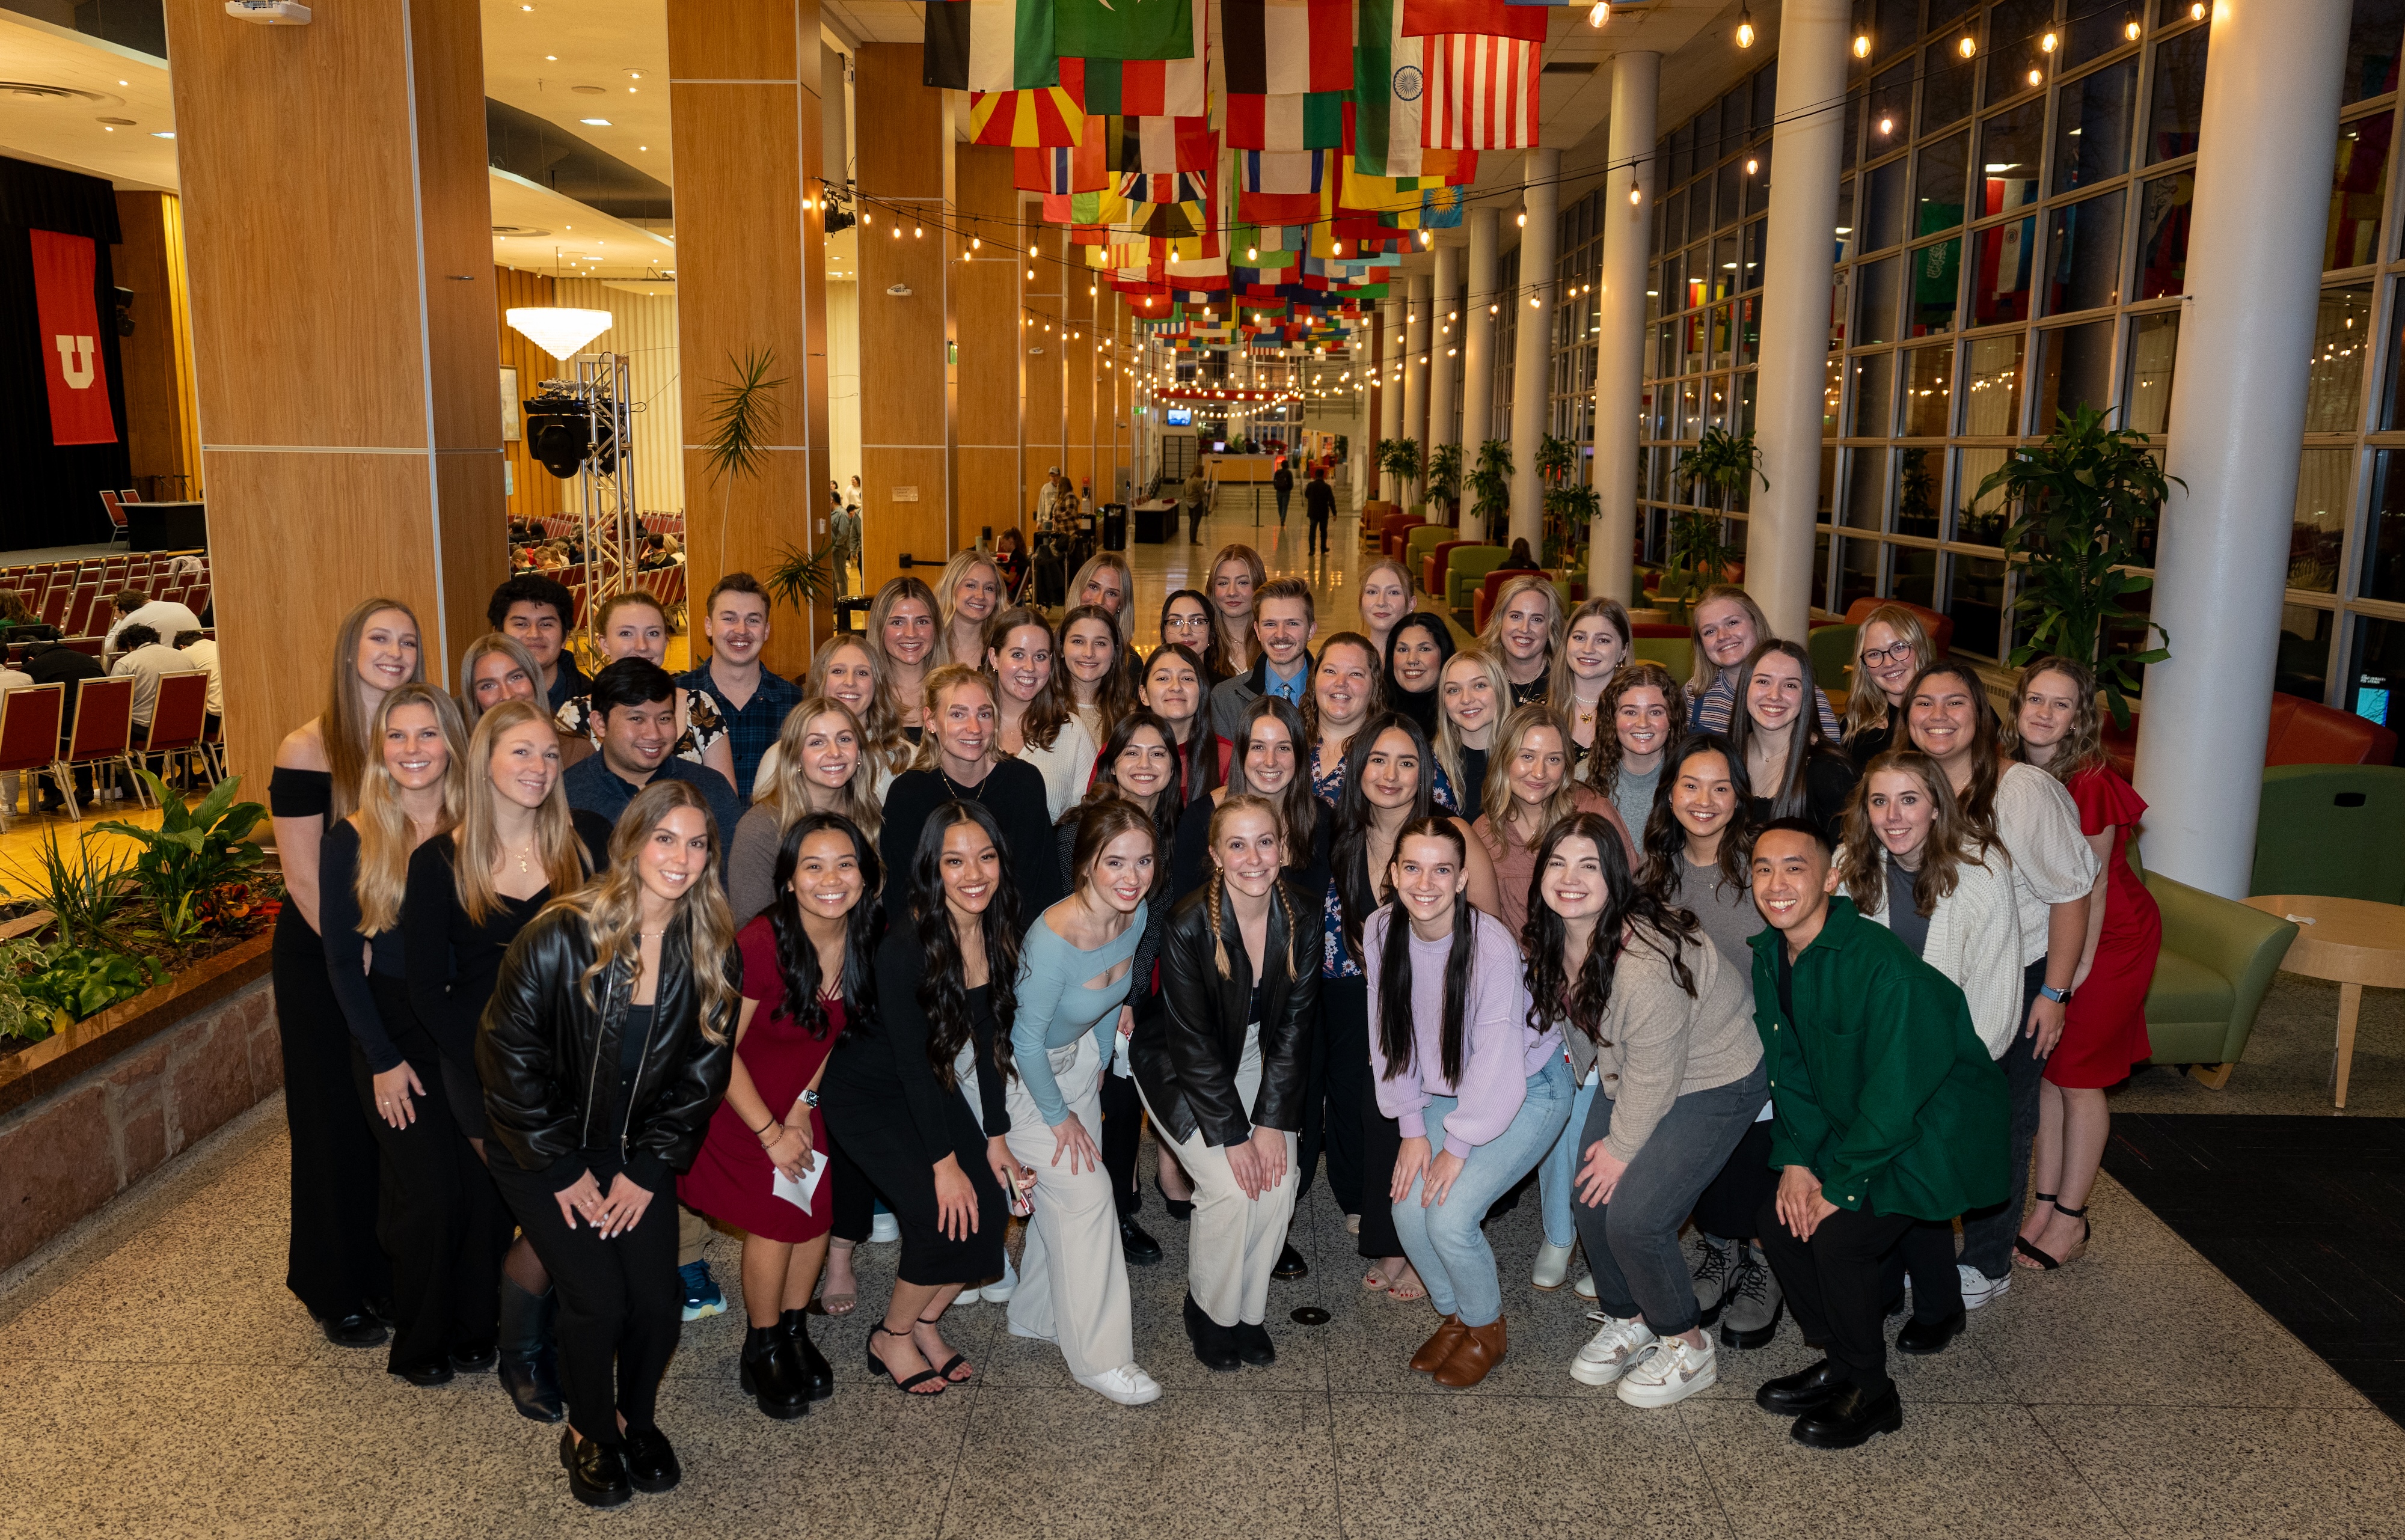 59 students pose for a group photo in the hallway of the University of Utah Union Building